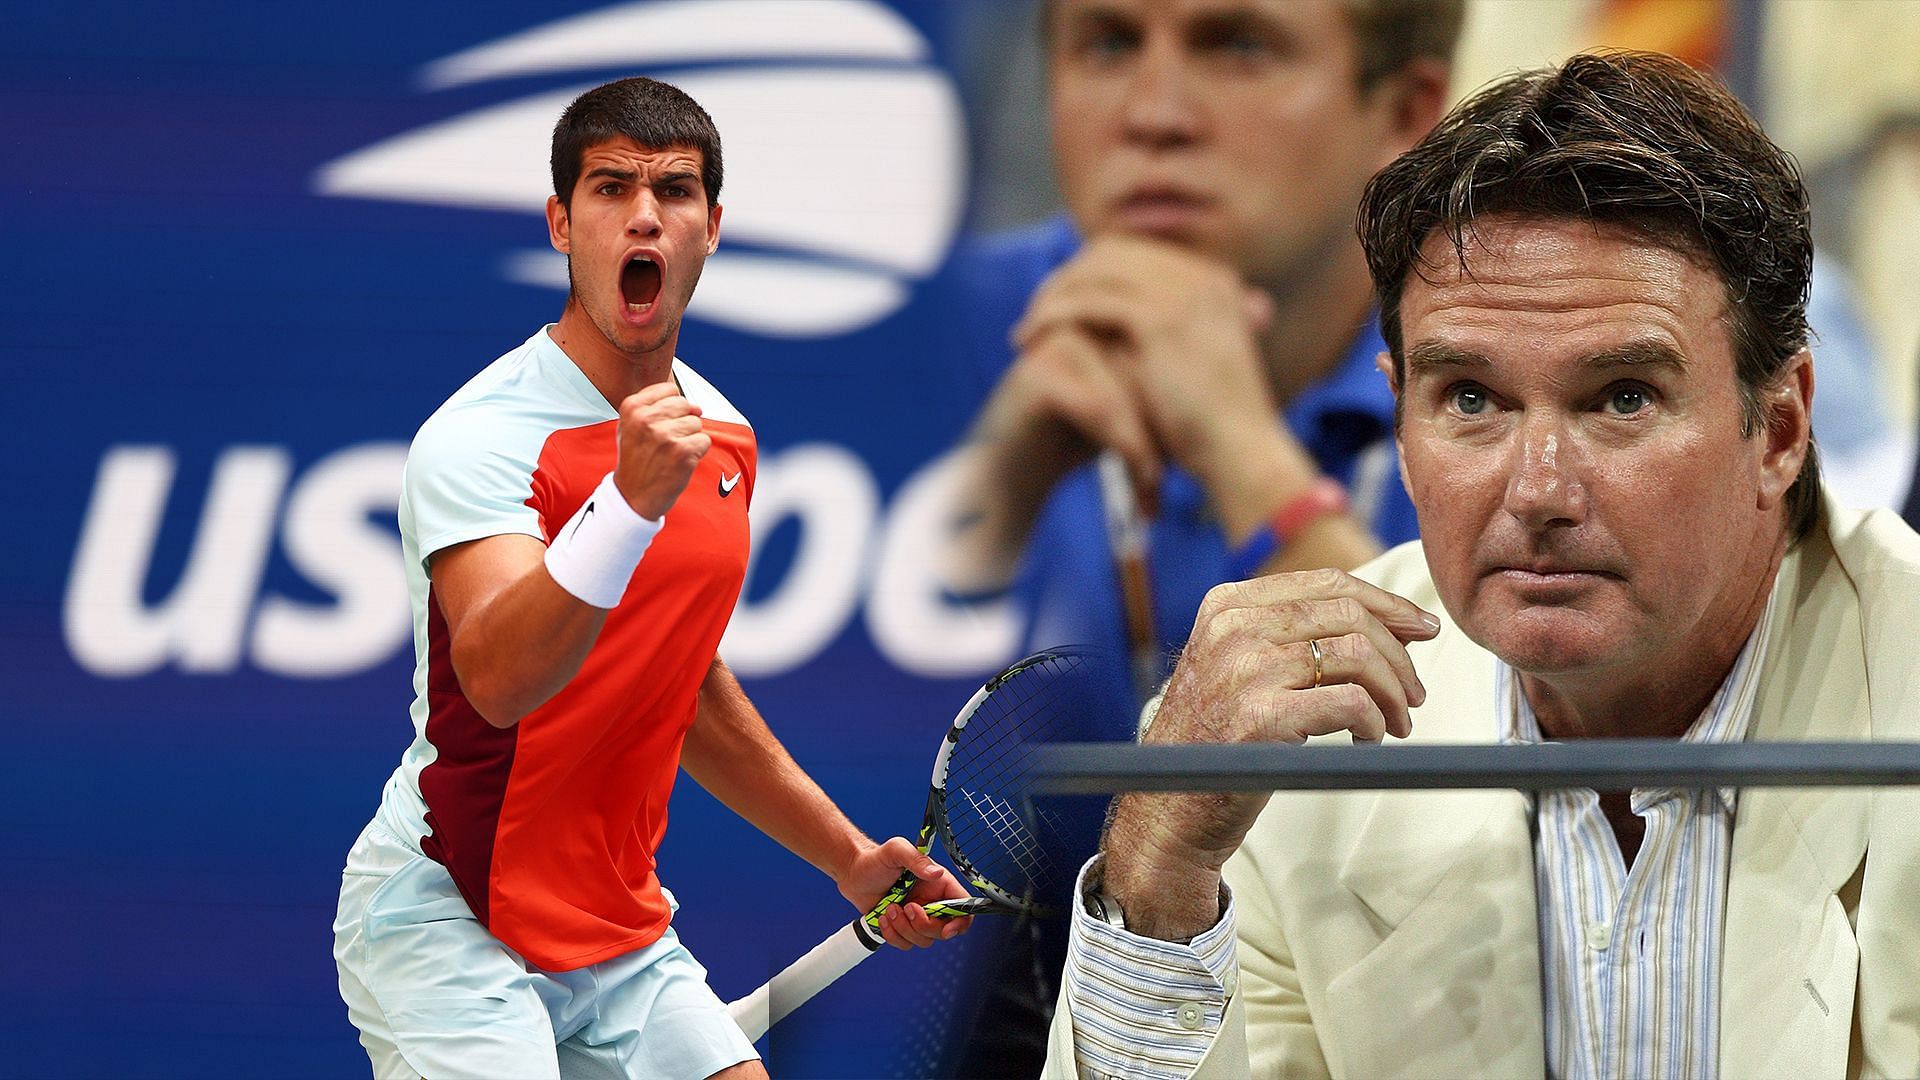 Jimmy Connors recently discussed Carlos Alcaraz and the future of tennis